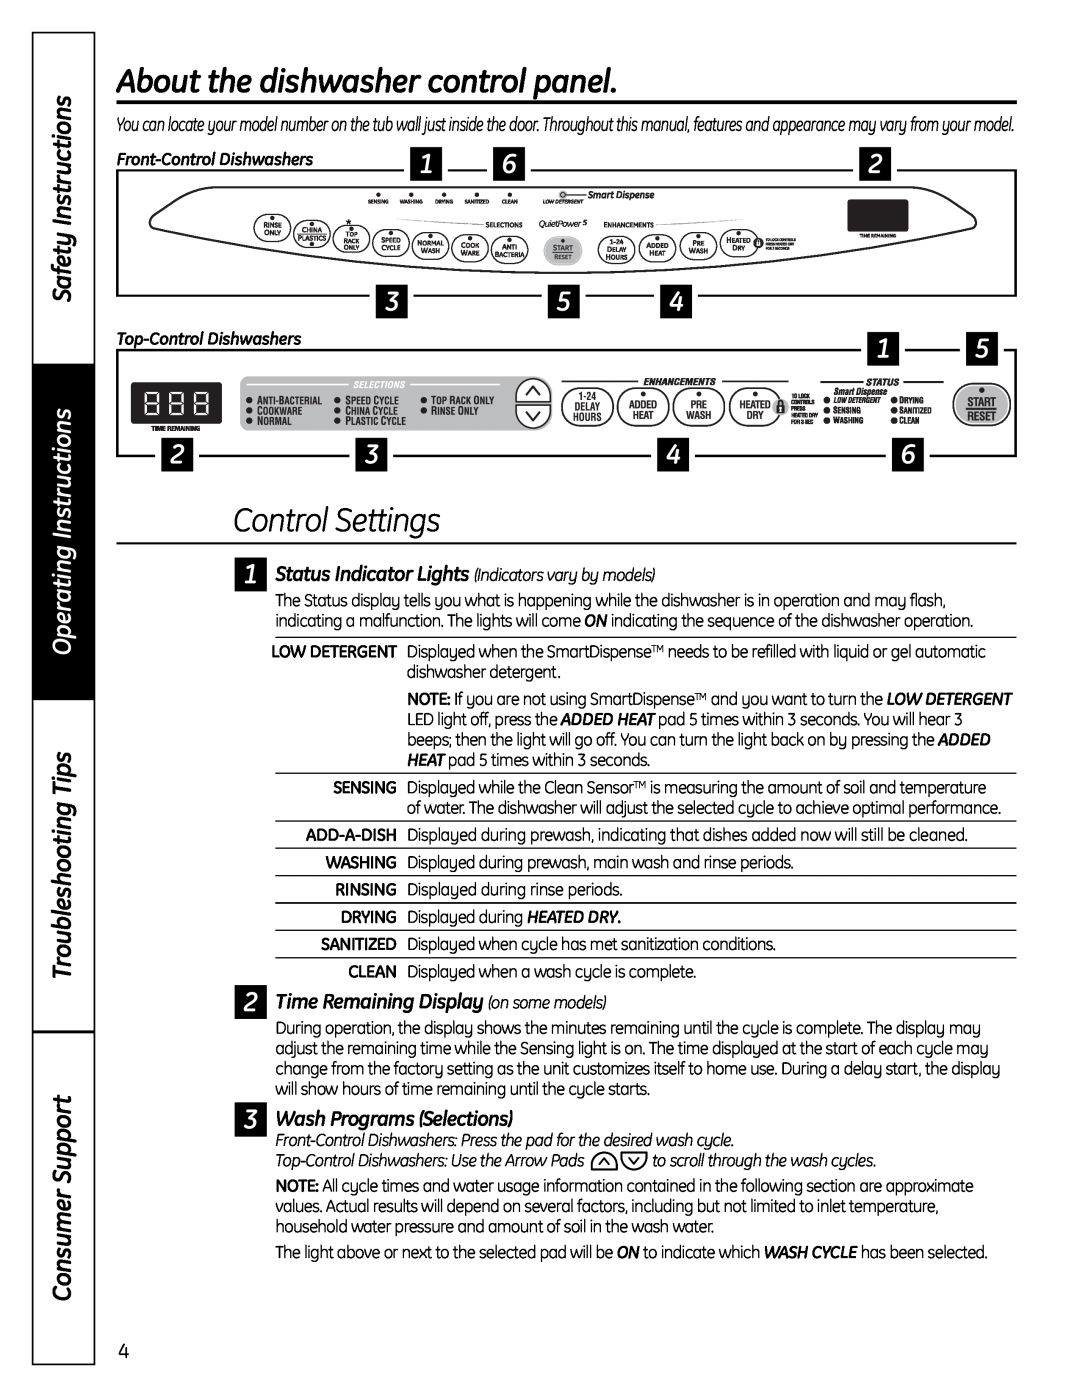 GE Stainless Steel Tub Dishwasher manual About the dishwasher control panel, Control Settings 